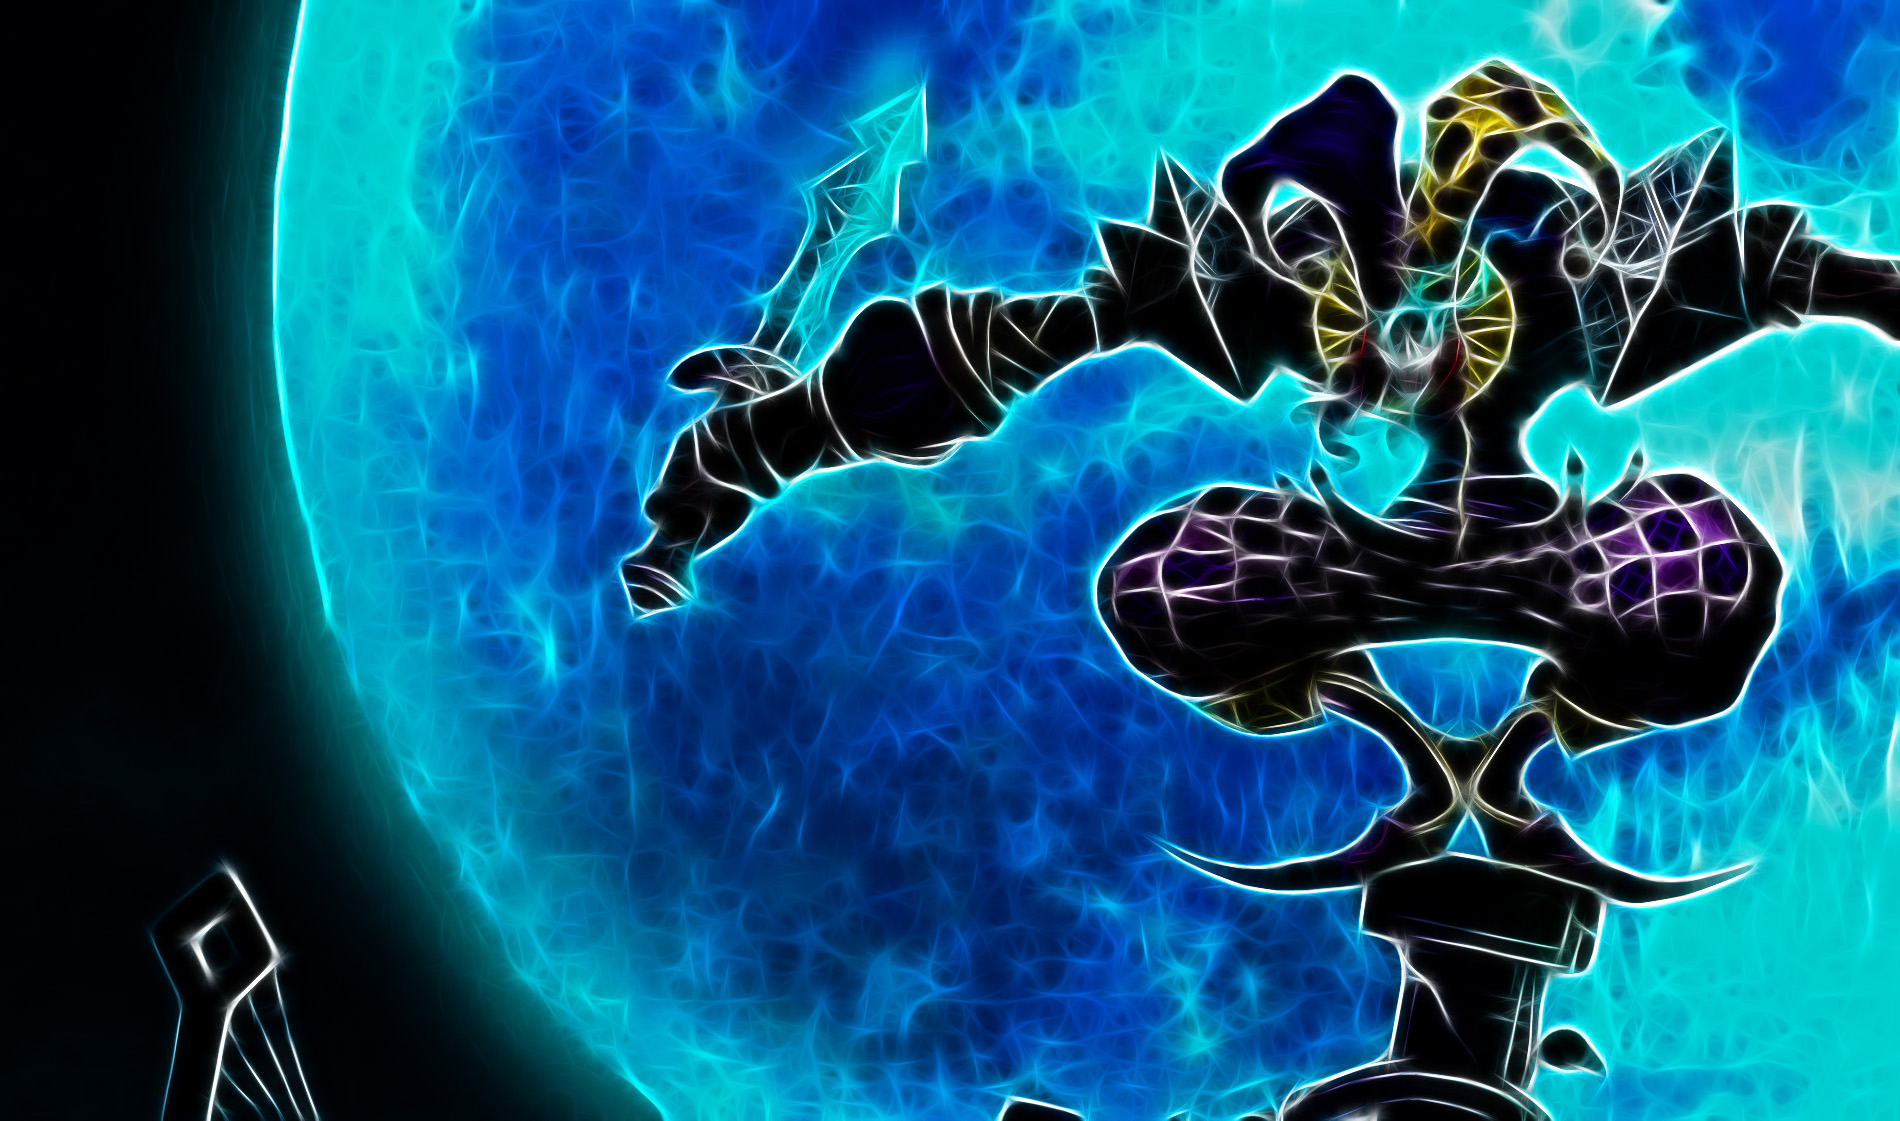 shaco wallpaper 1920x1080,electric blue,organism,fictional character,illustration,graphic design